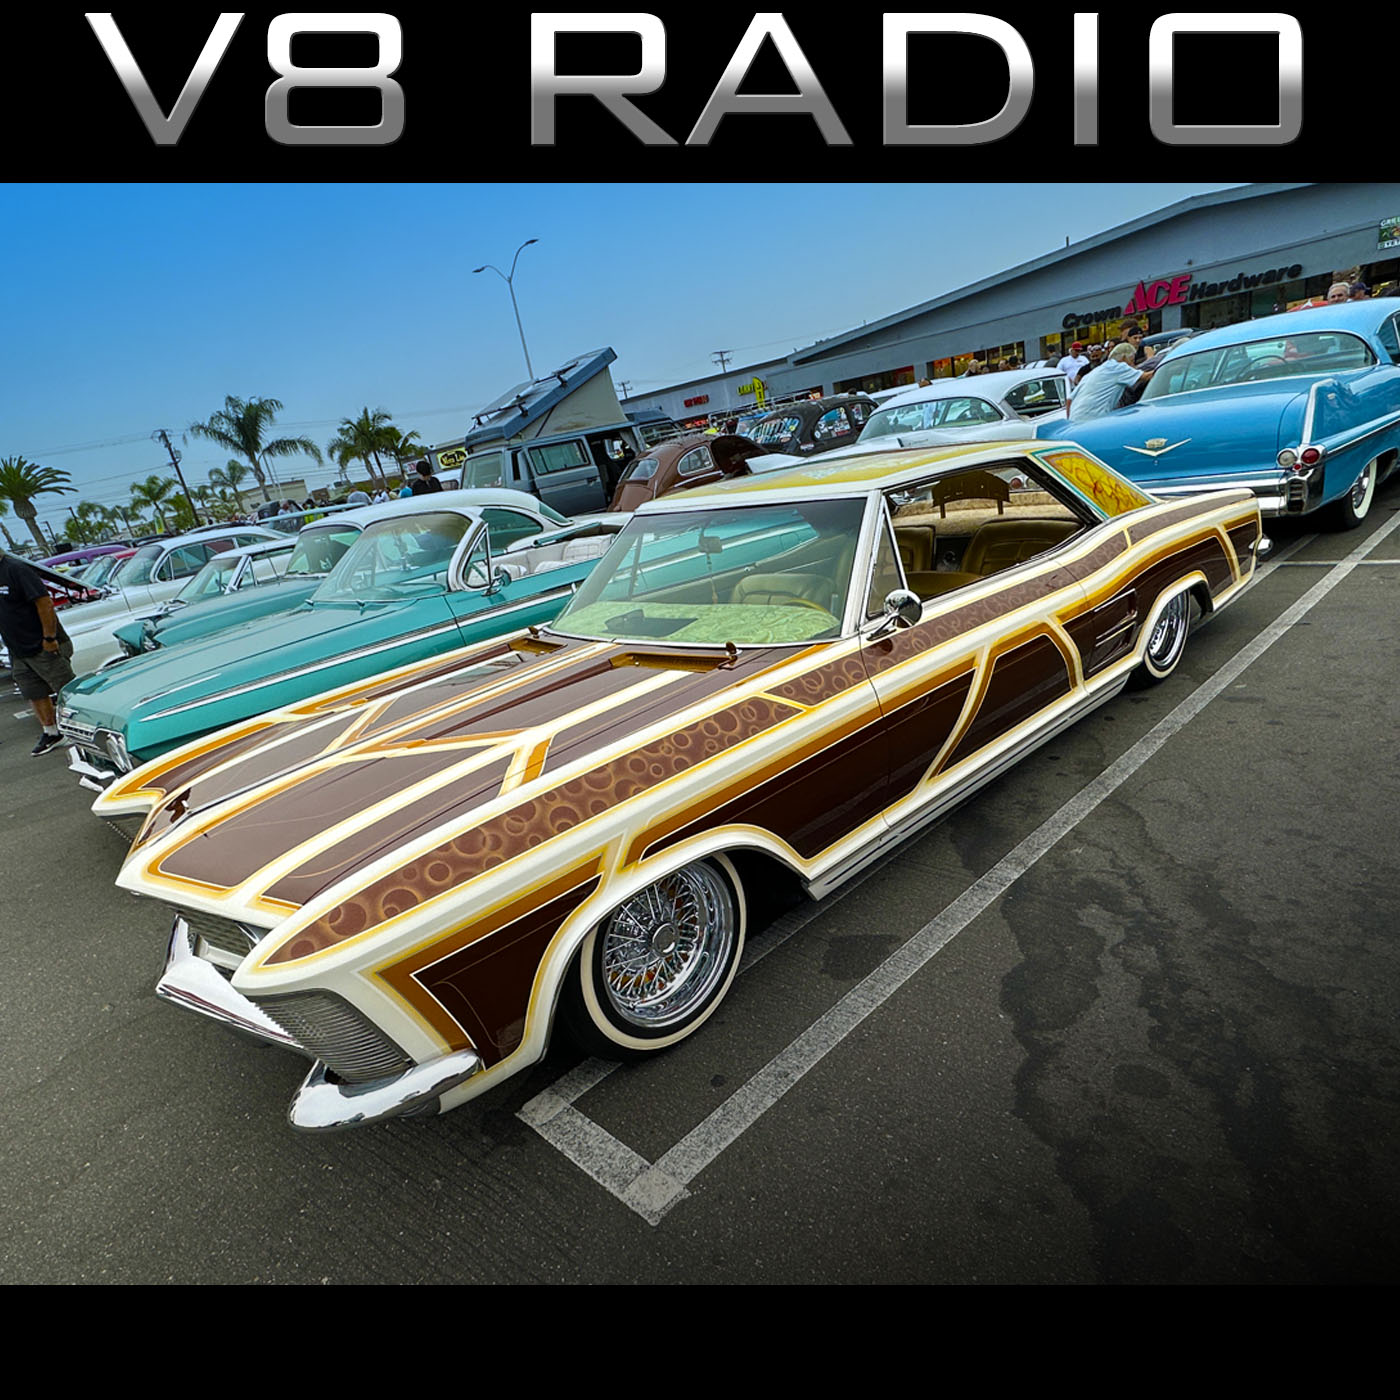 SEMA Gala, Donut Derelicts, Q-Ball's Review, Automotive Trivia, and Much More on the V8 Radio Podcast!